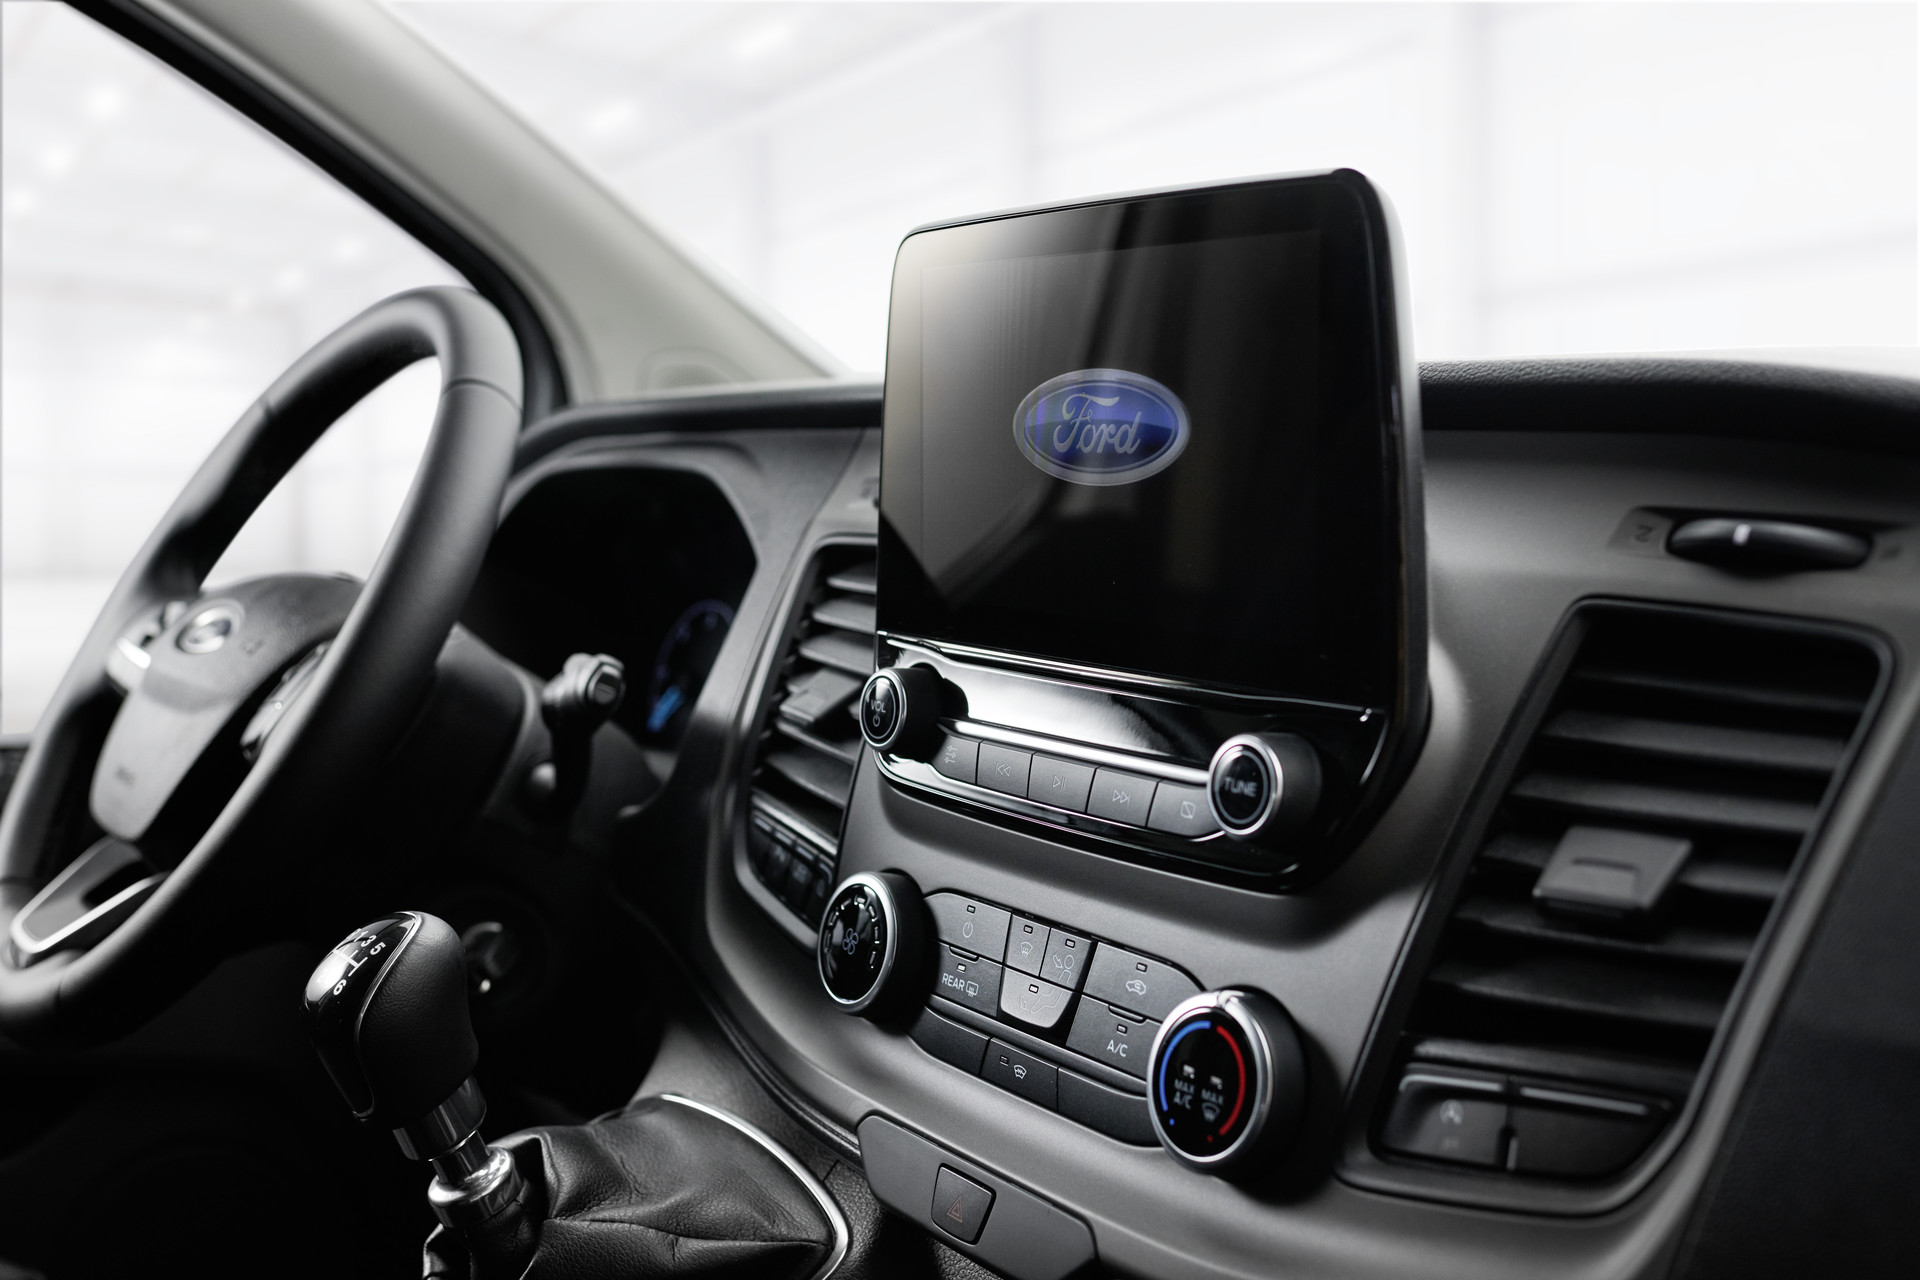 Ford audio system with DAB+, reversing camera with image of the rearward travel path shown on the multifunction display, air-conditioning including dust and pollen filter.